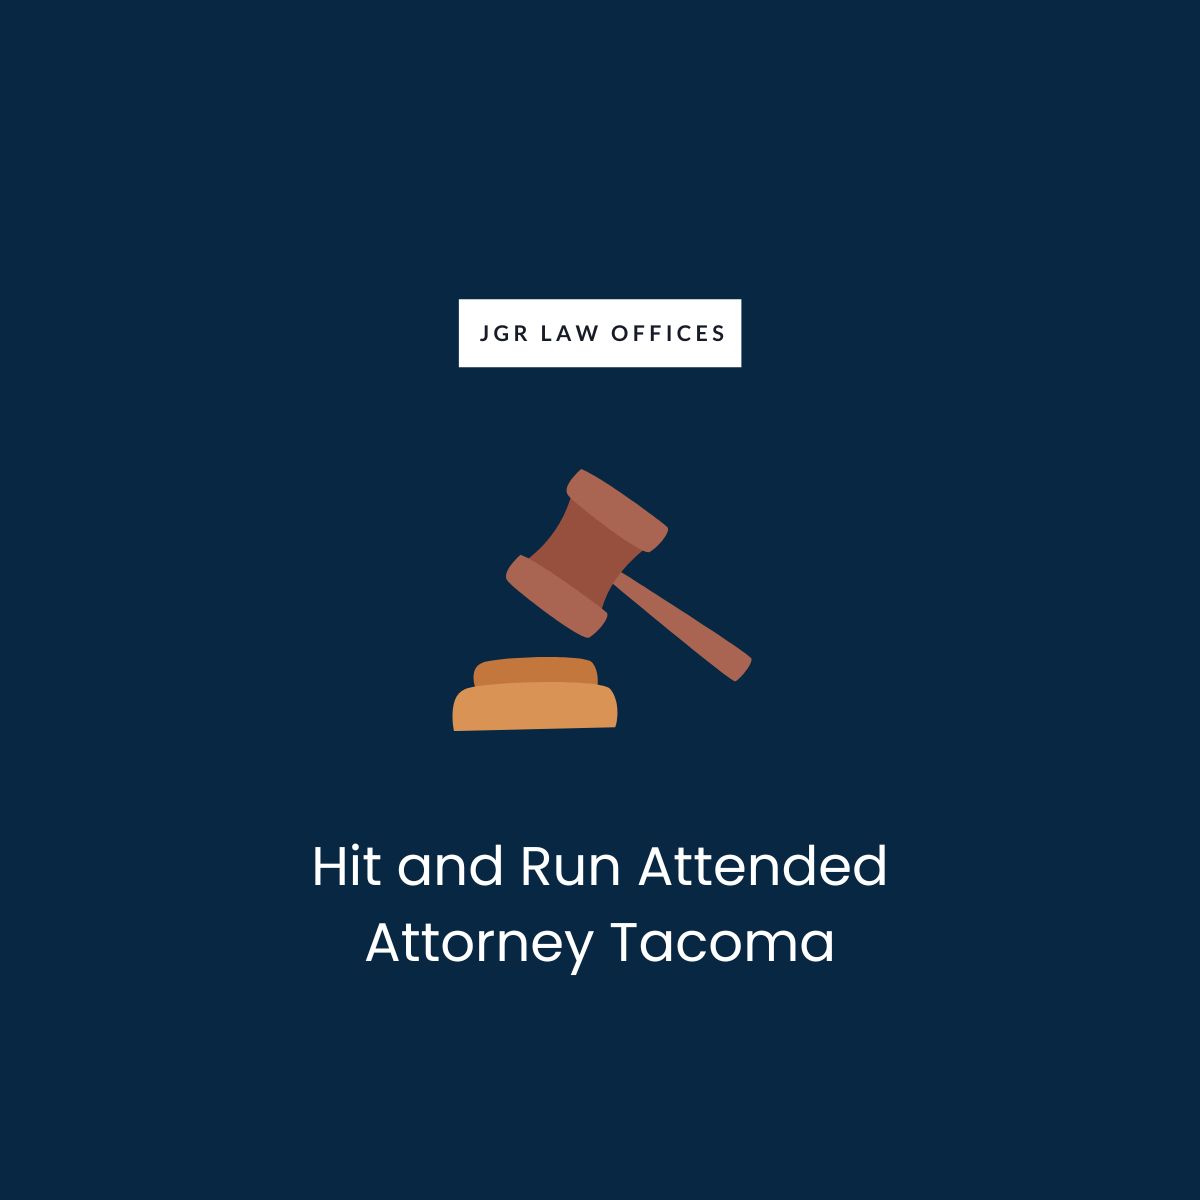 Hit and Run Attended Attorney Tacoma